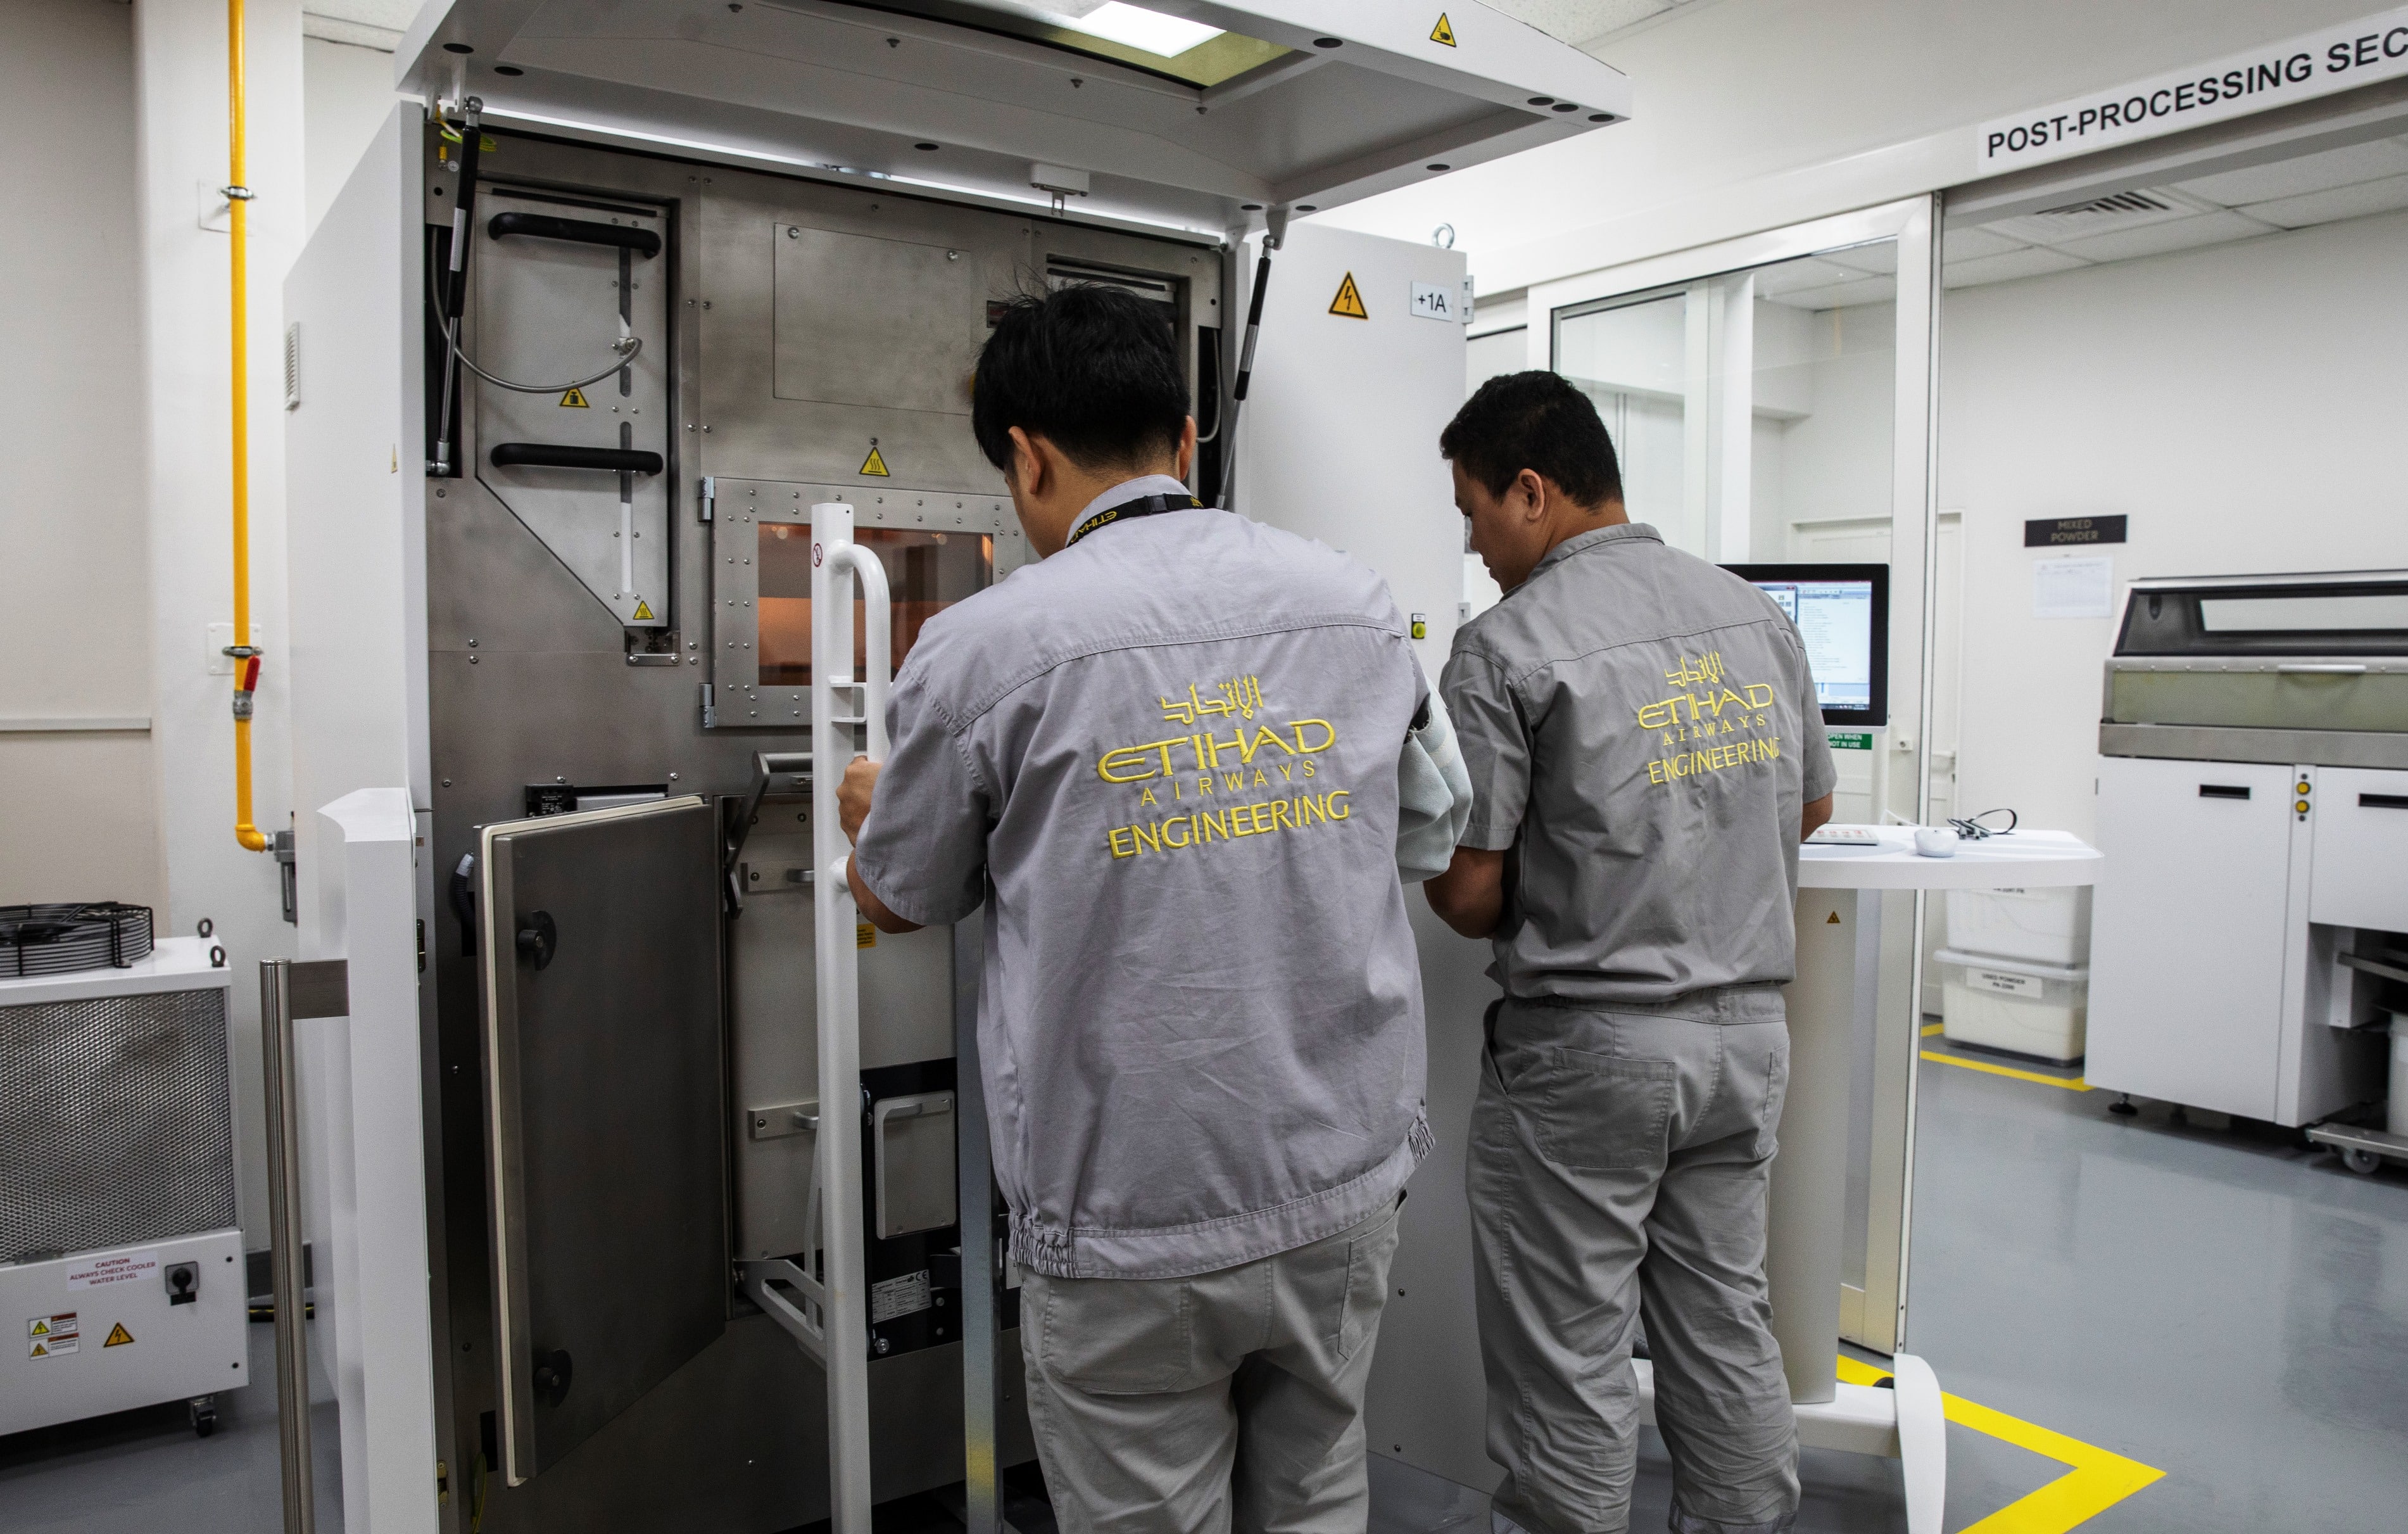 Etihad Engineering engineers at work using the pioneering EOS Additive Manufacturing 3D Printer which is now located at Etihad Engineering’s facility located in Abu Dhabi. (Source: Etihad Aviation Group)